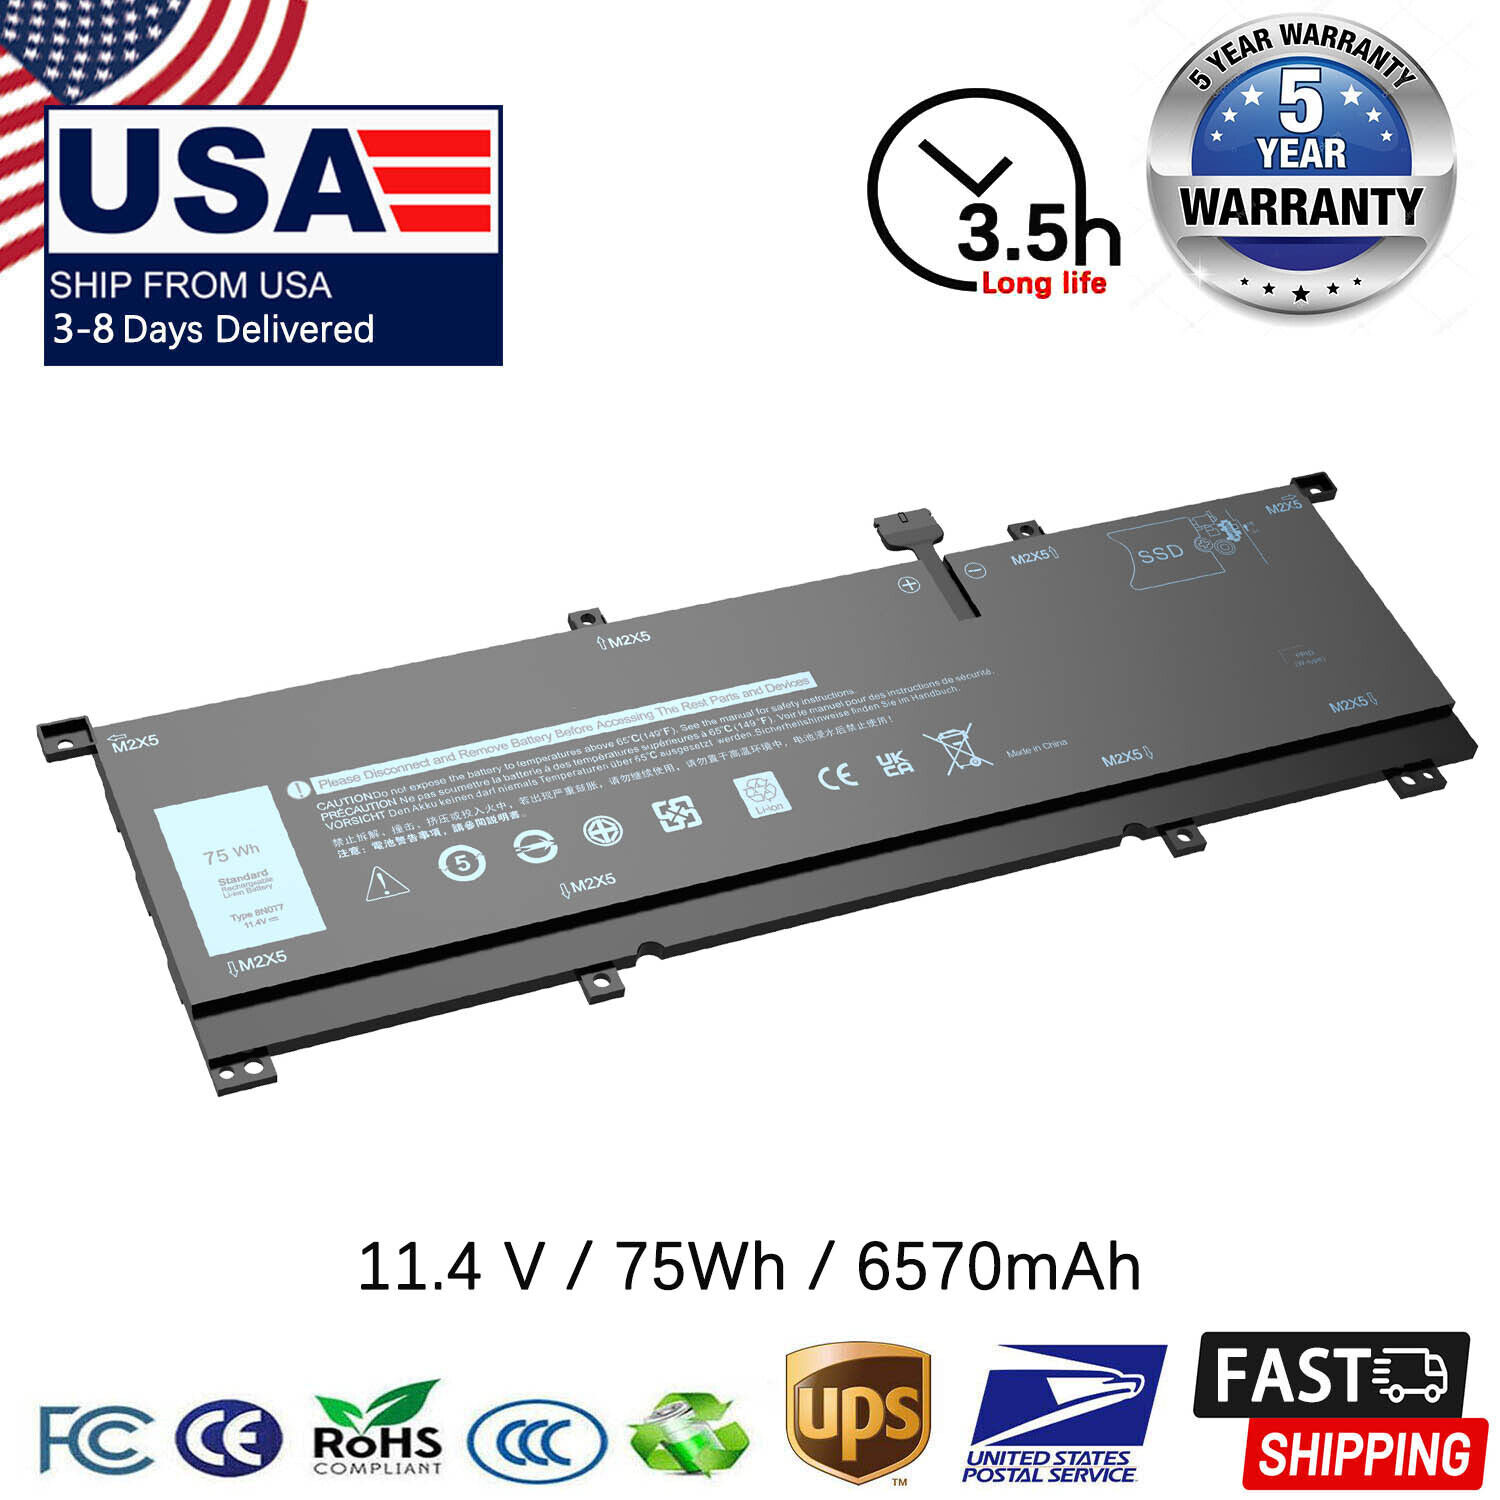 8N0T7 Laptop Battery for Dell XPS 15 9575 P73F001 Series Notebook 0TMFYT 75Whr